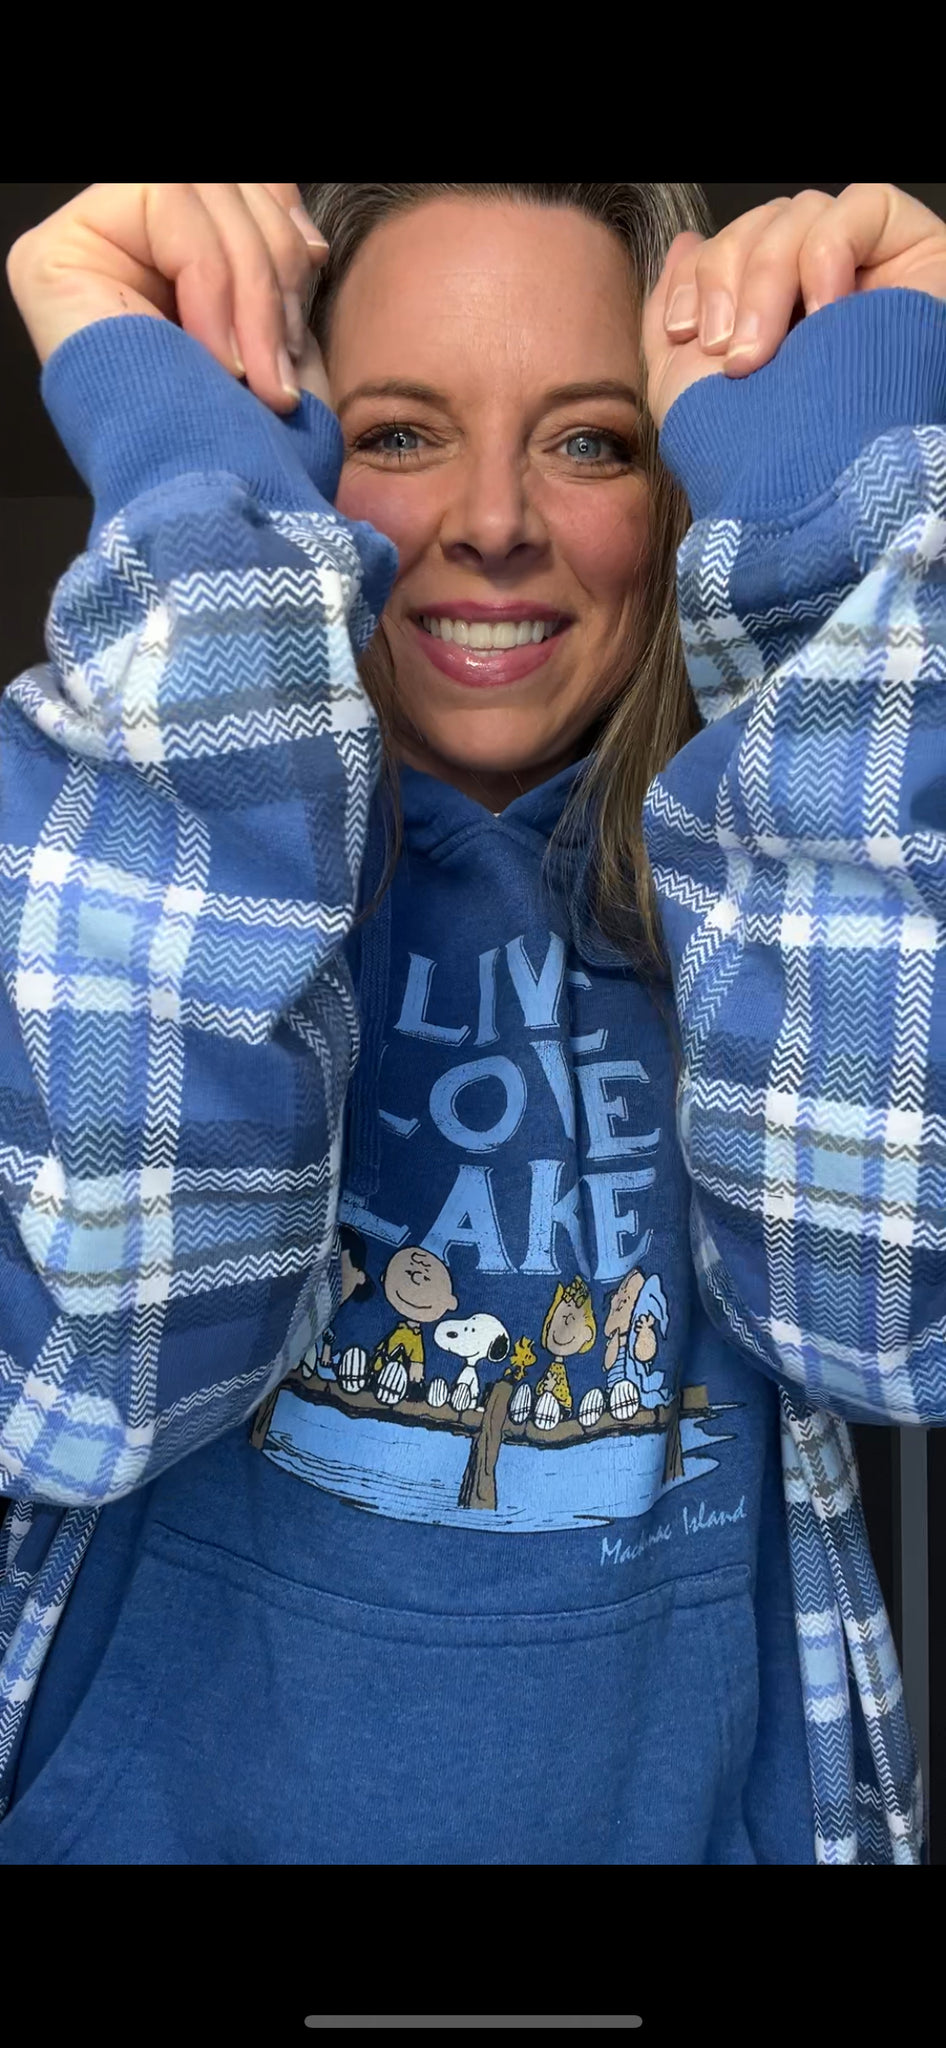 Upcycled Snoopy Lake – women’s M/L – thick sweatshirt with sweatshirt sleeves